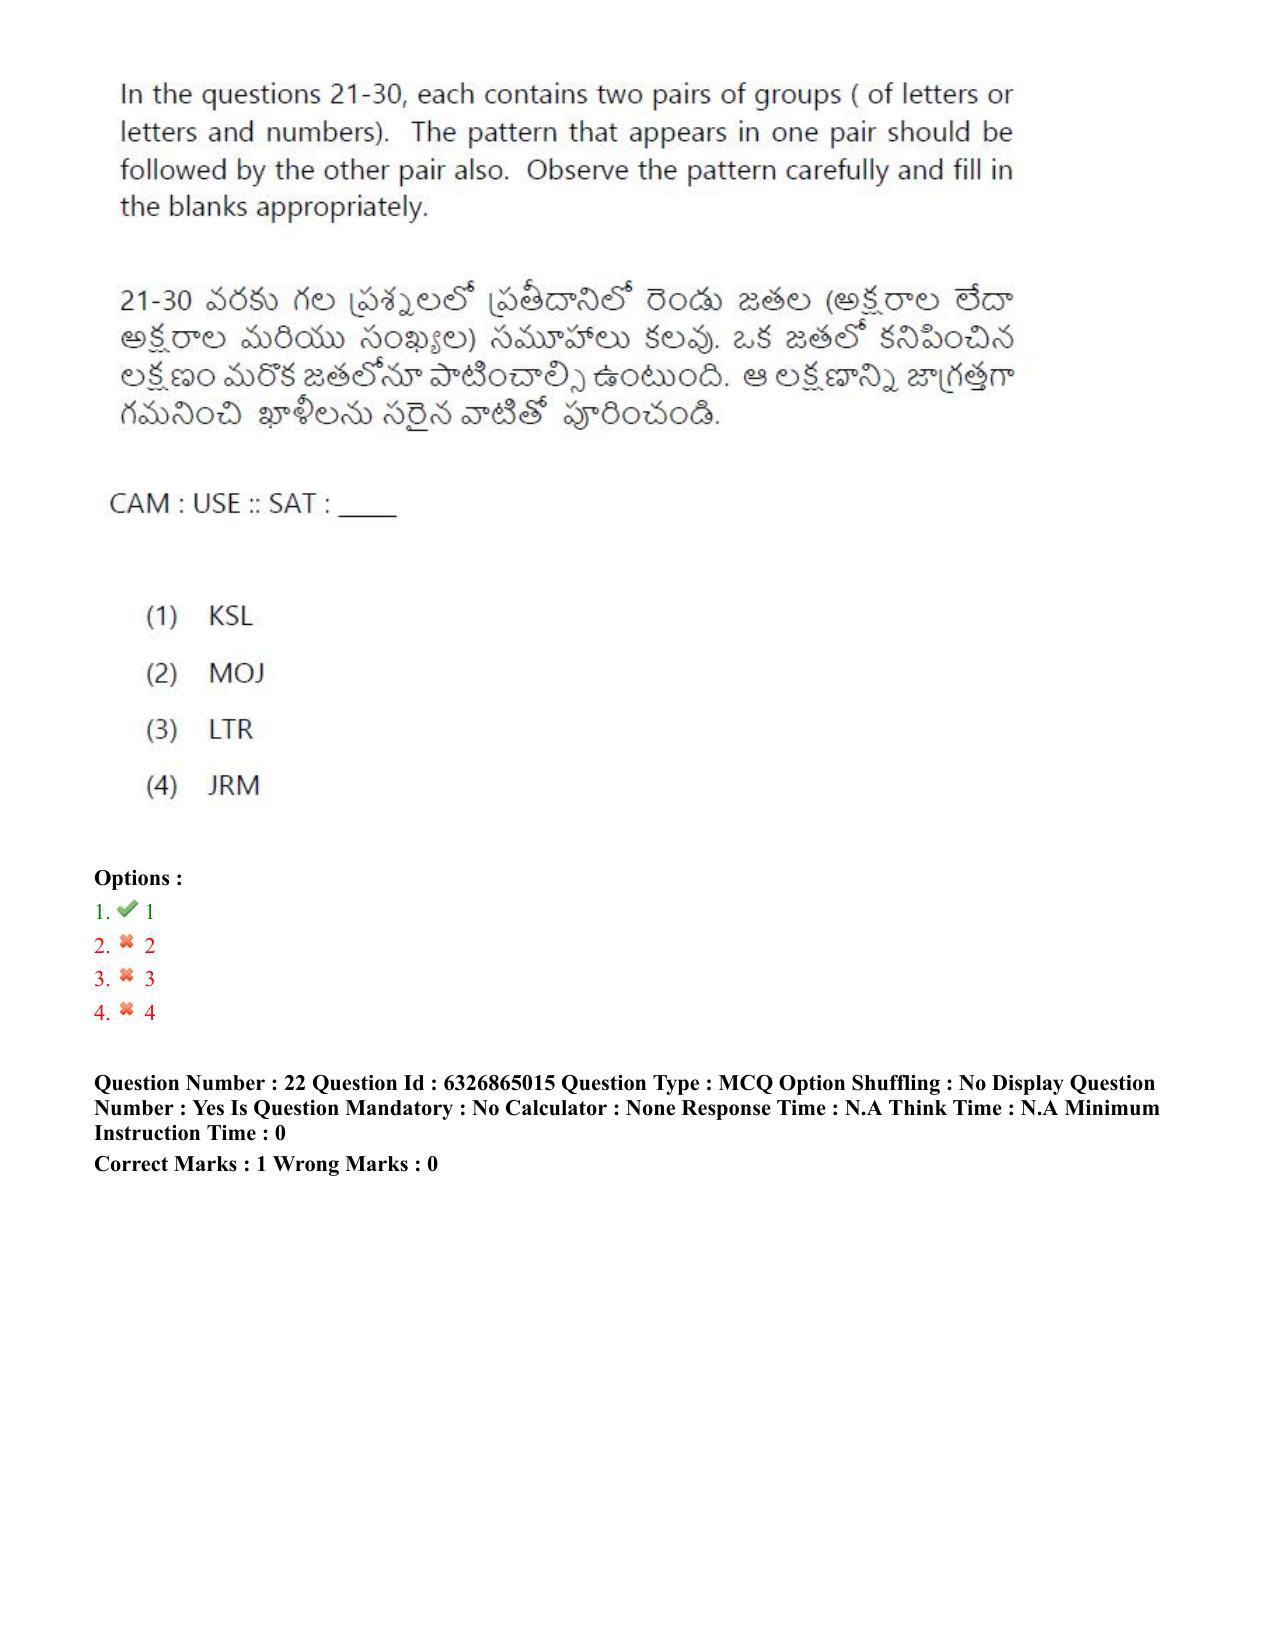 TS ICET 2022 Question Paper 2 - Jul 28, 2022	 - Page 20